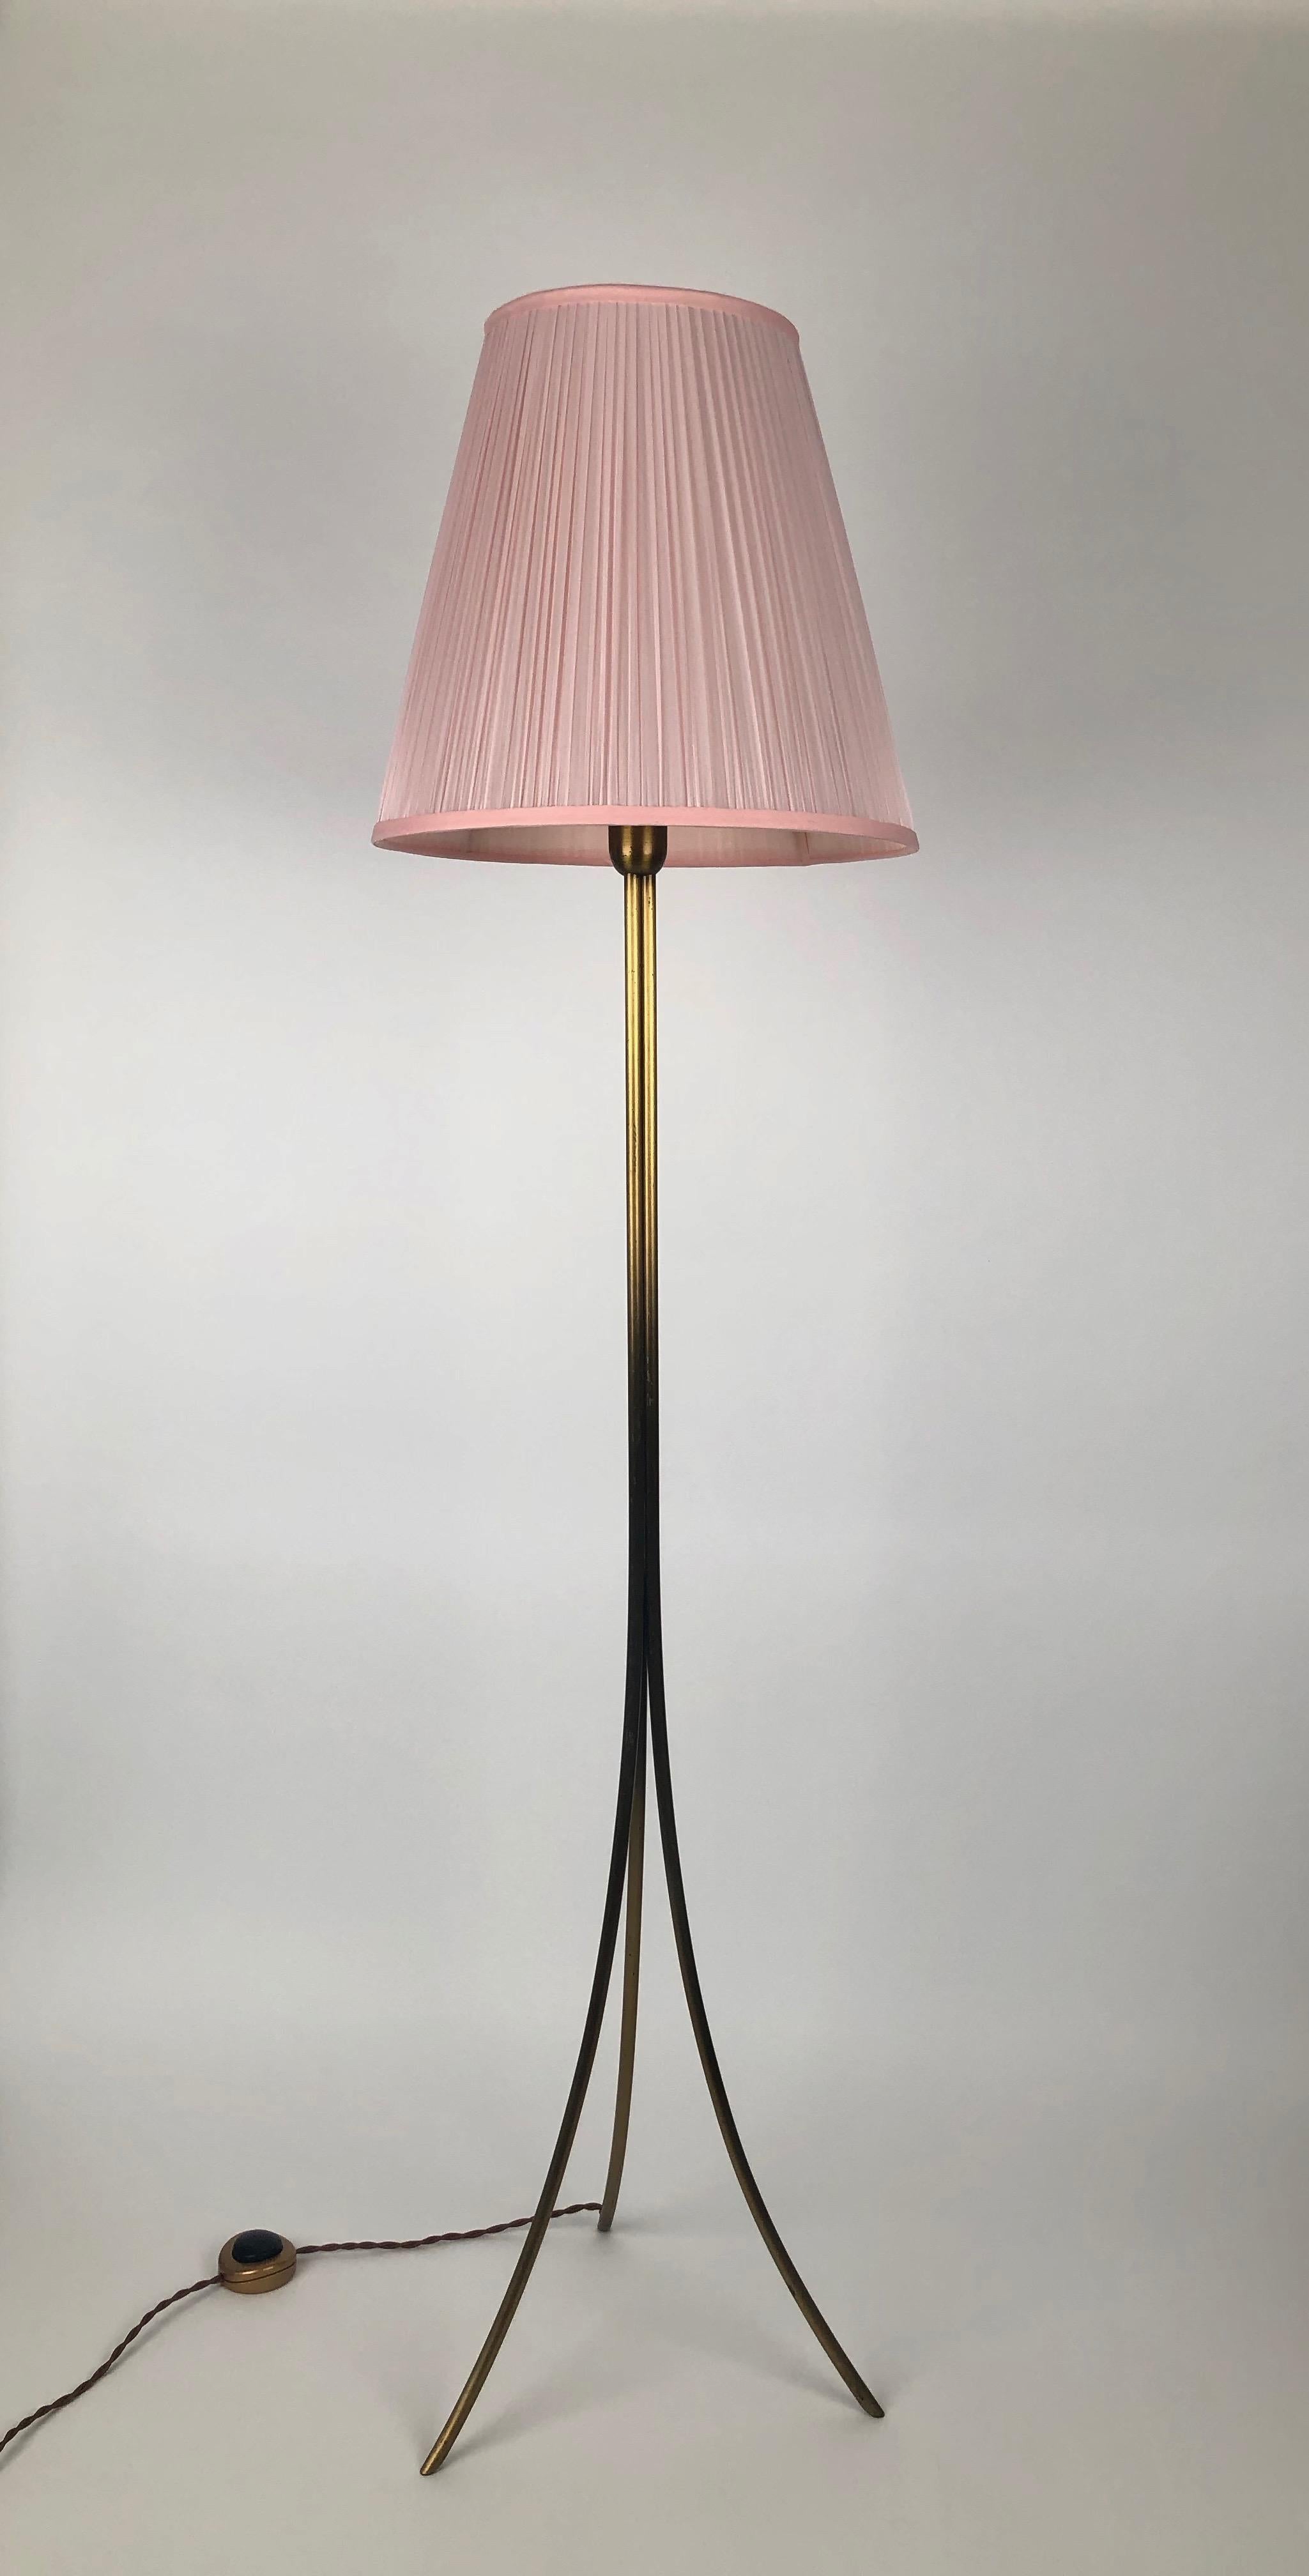 Elegant, three leg floor lamp from Austria, produced in the mid 1950's. The metal work is flawless and superbly assembled to create a delicate form. Complimenting this is a lamp shade made from semi transparent pink silk. A twisted braided